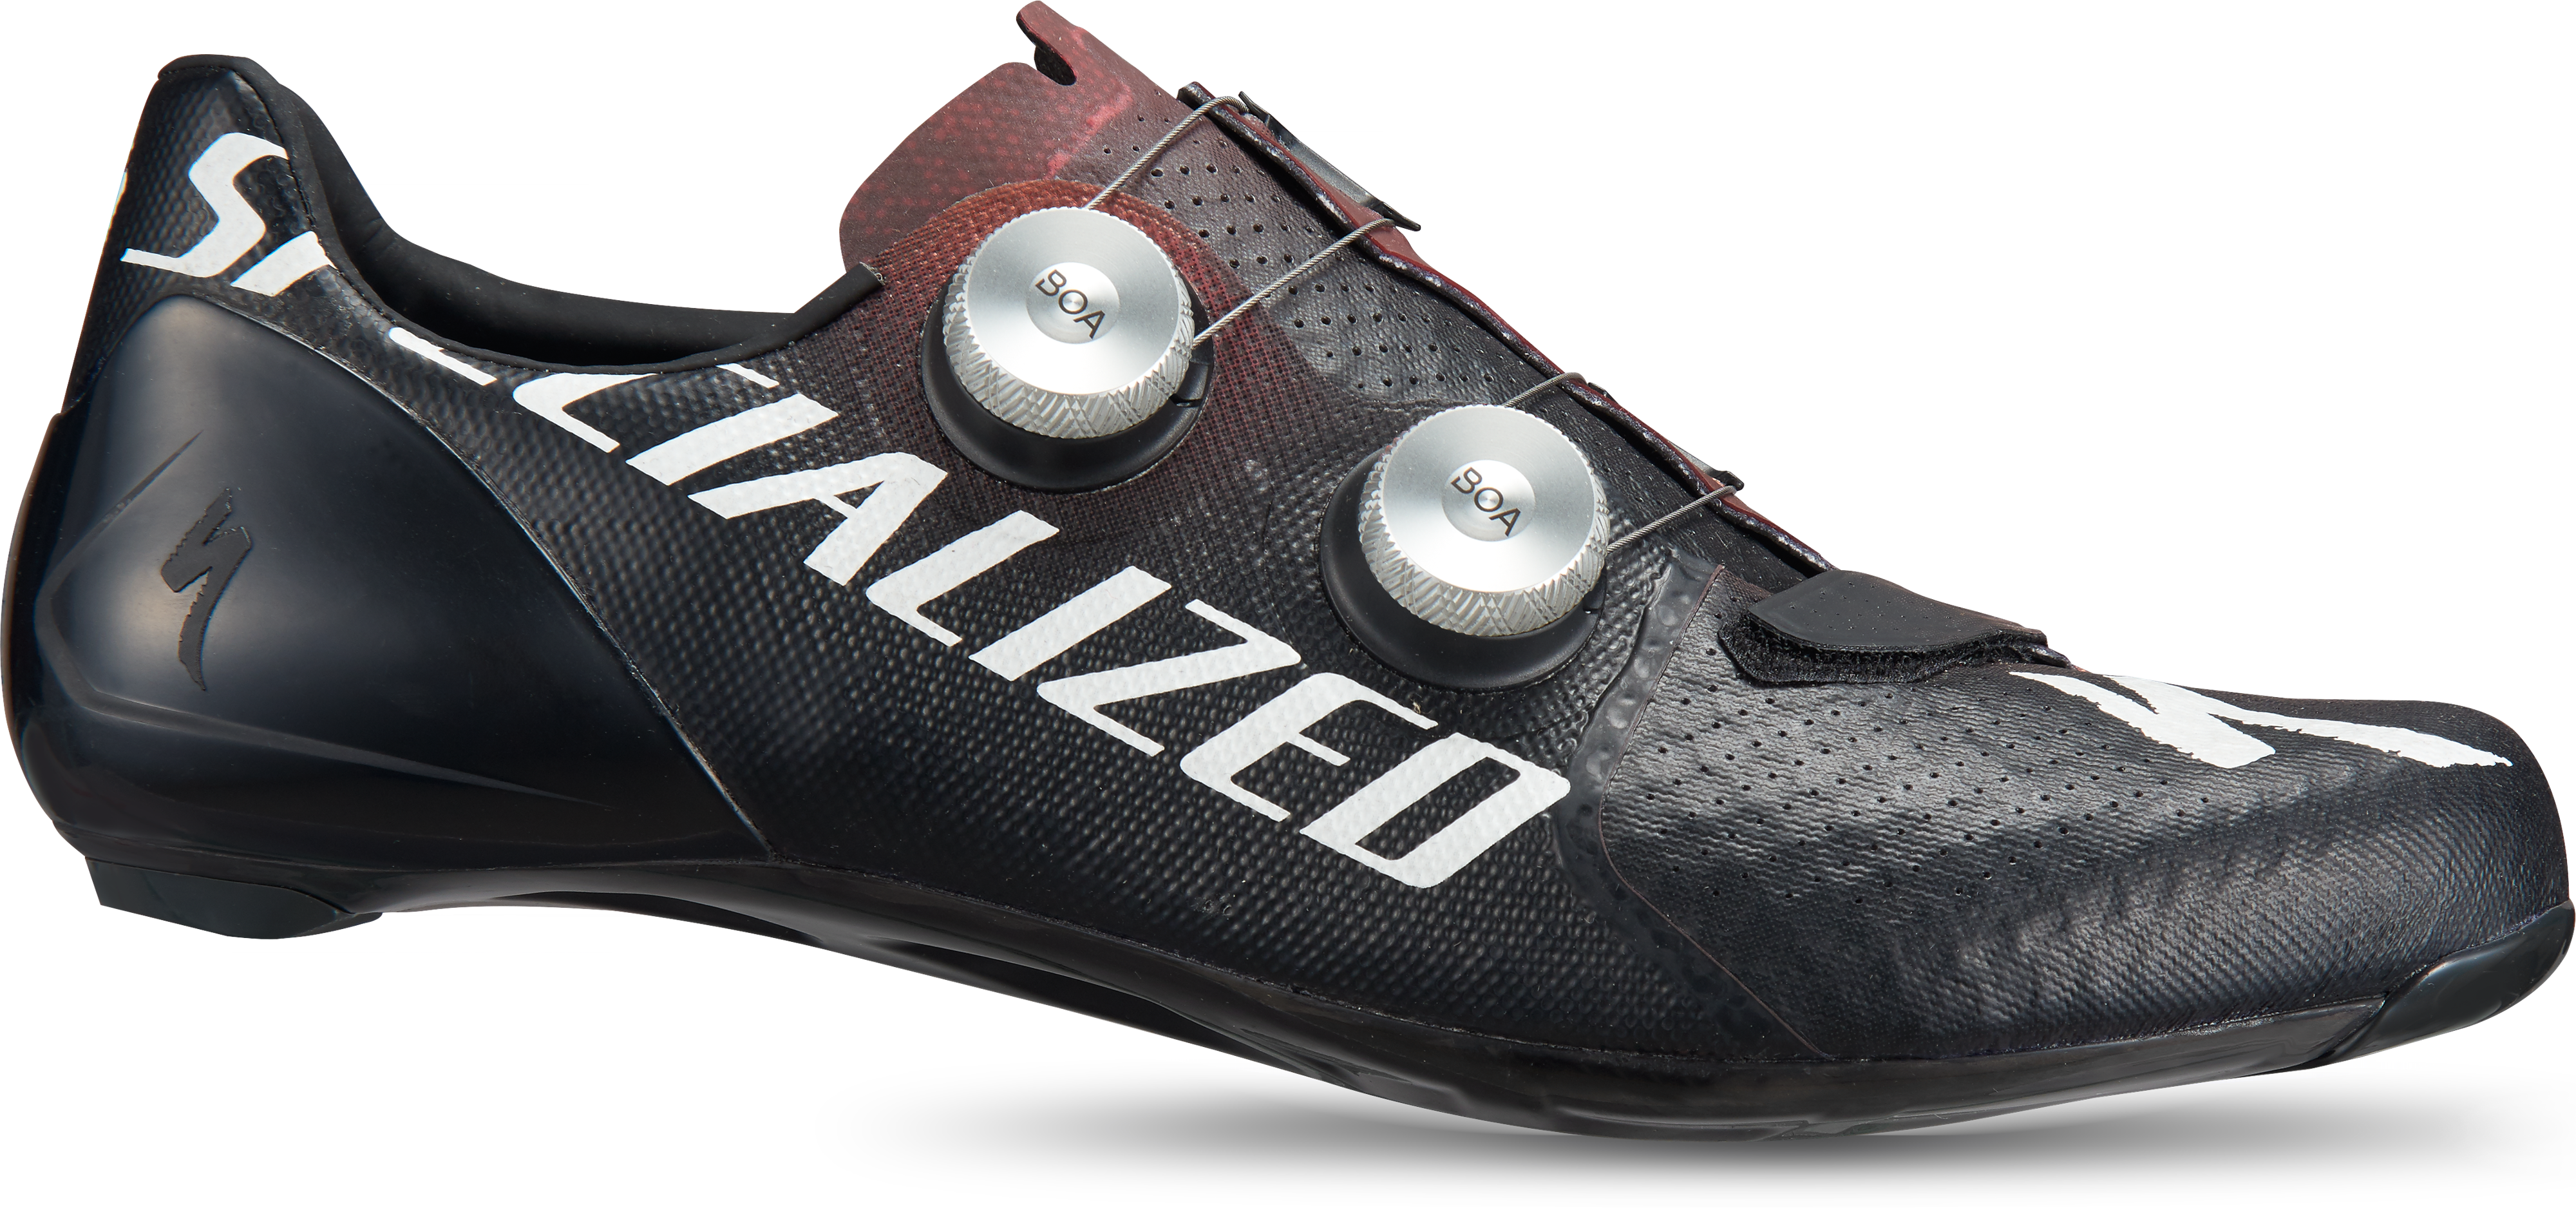 S-Works 7 Road Shoes - Speed of Light Collection